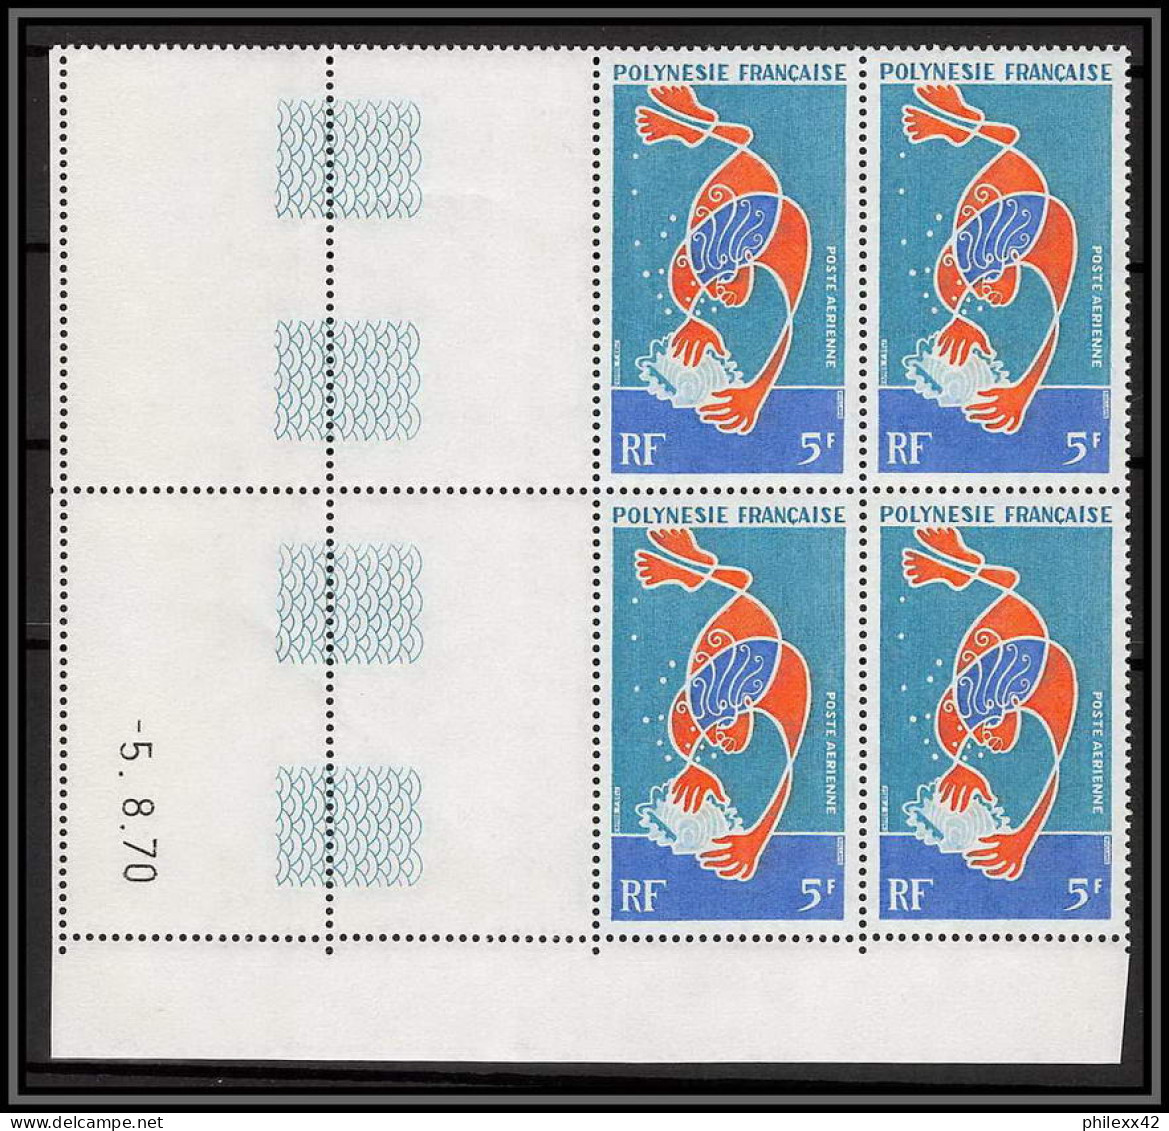 91982 Polynesie N°35 Huitre Oyster Coquillage Shell Essai Proof Non Dentelé Imperf ** MNH Fdc épreuve De Luxe Proof  - Imperforates, Proofs & Errors